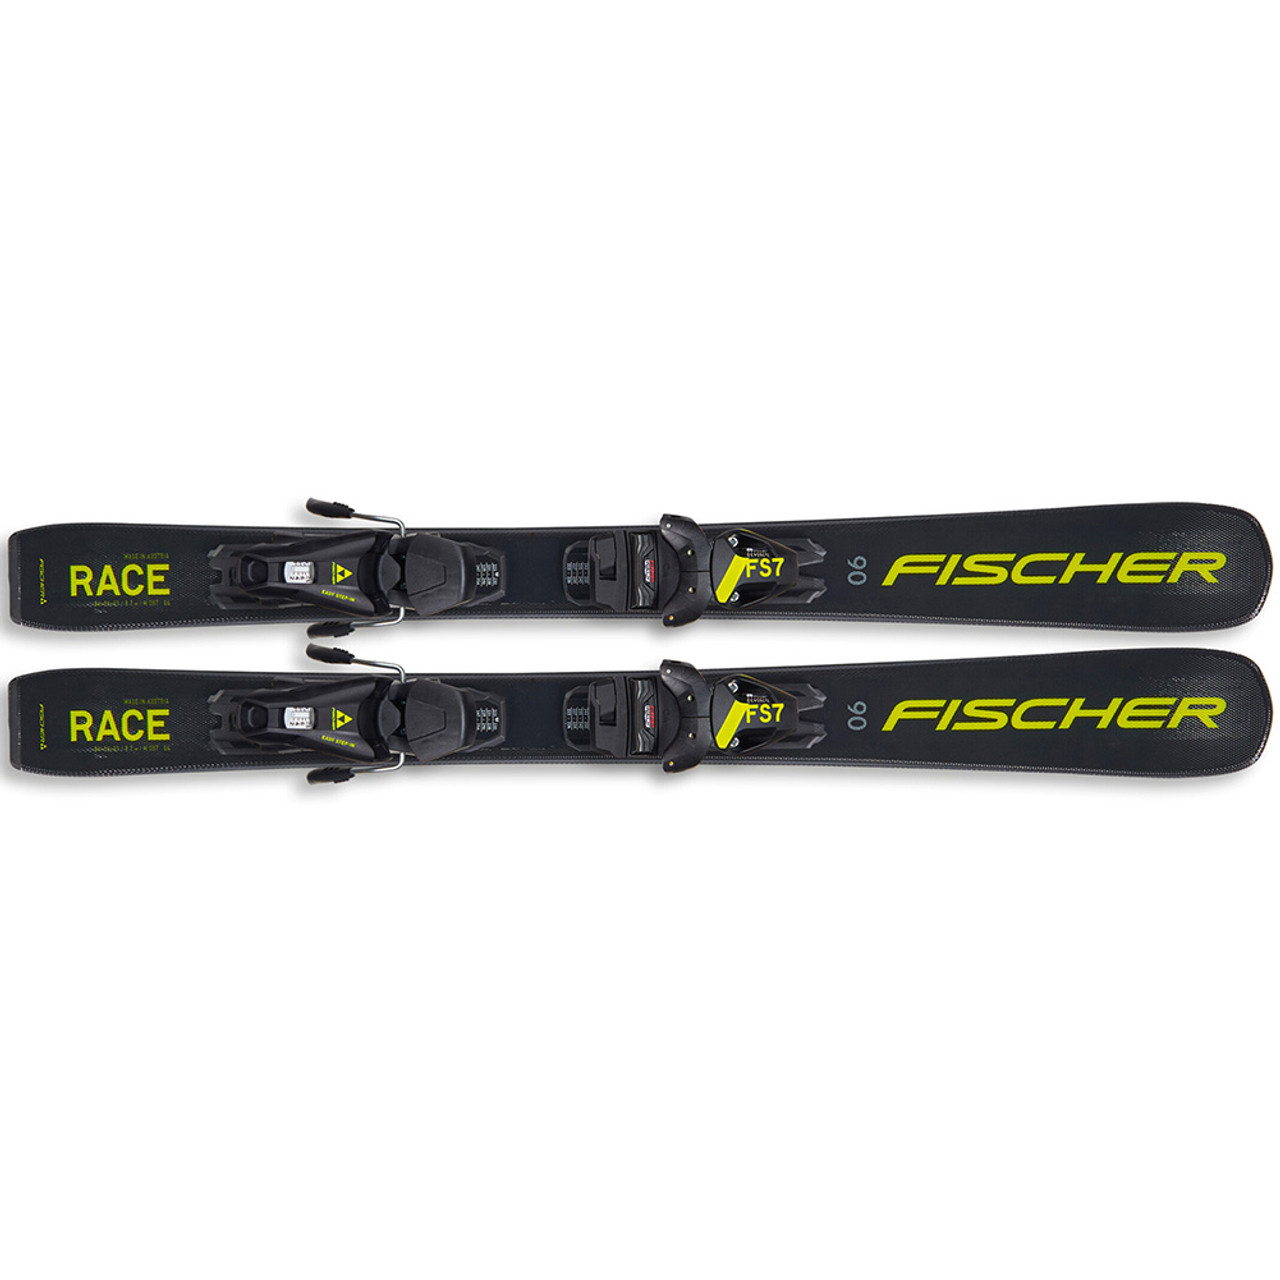 FISCHER RC4 Race 130-150 Skis With FS7 Bindings P19522